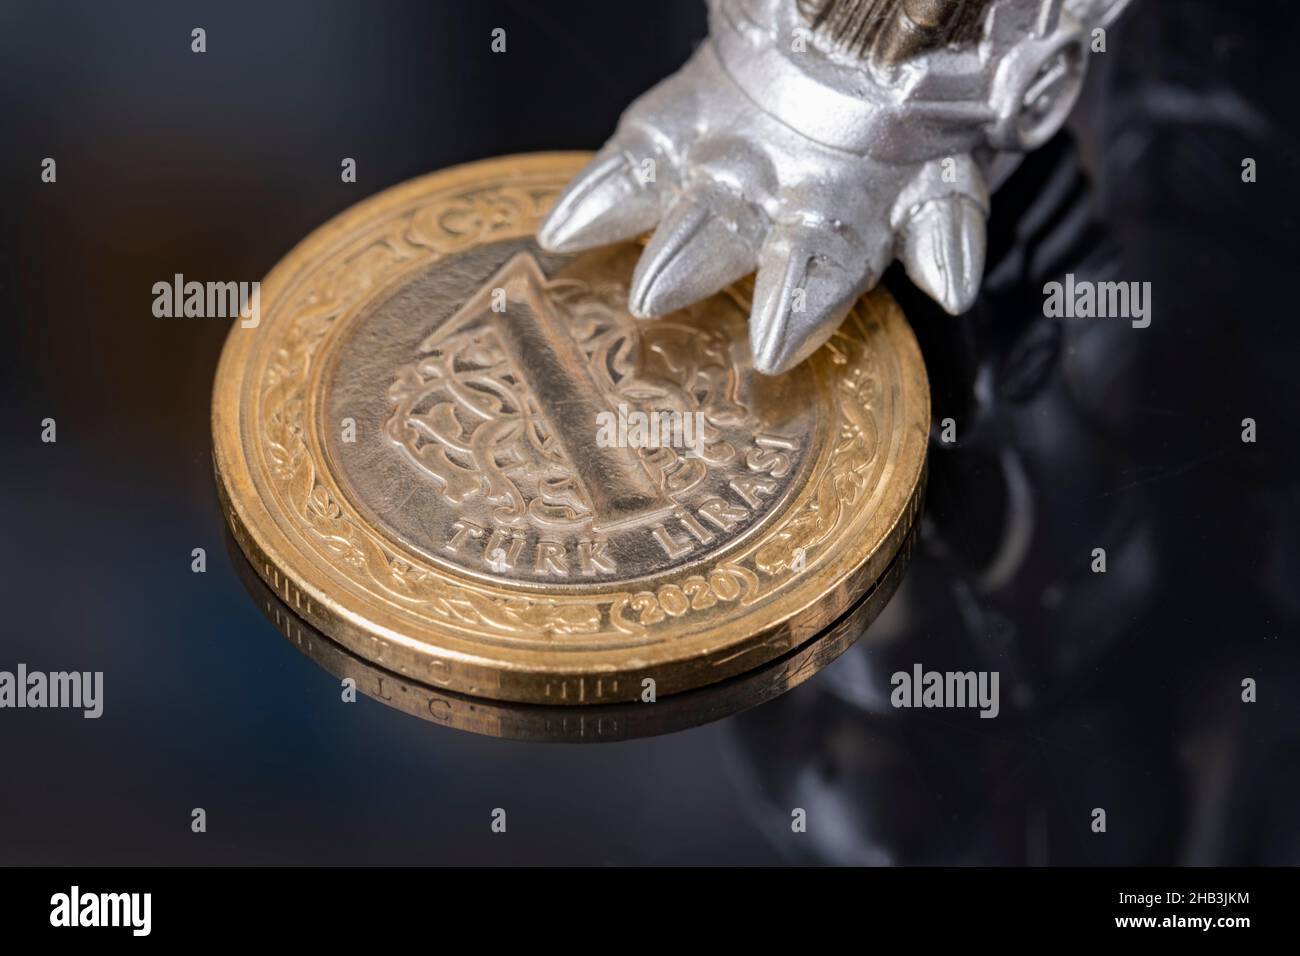 Monster feet standing on one Turkish Lira coin. TL losing value against inflation. Financial and economy dark background with copy space. Stock Photo